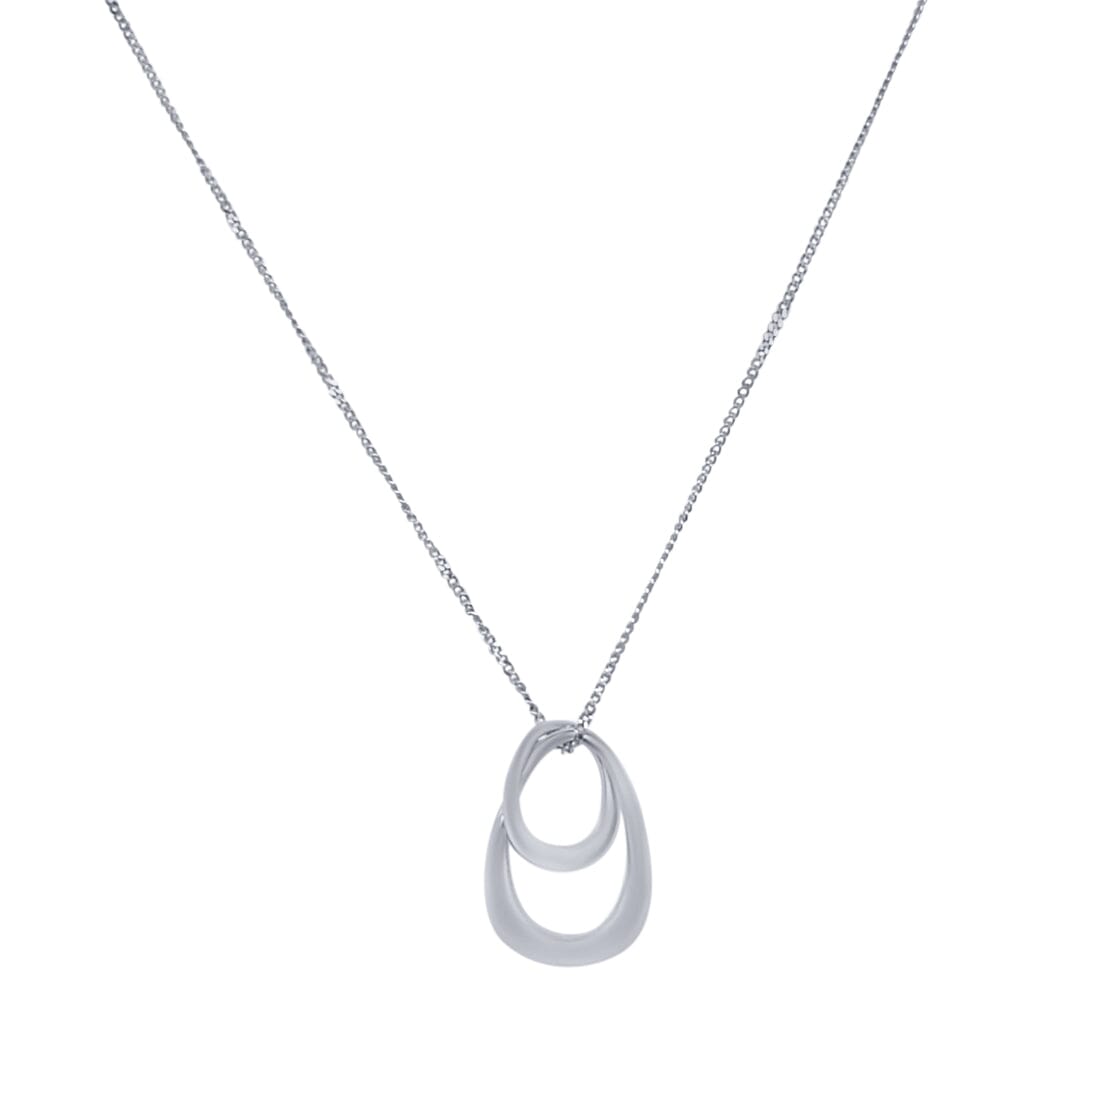 45cm Plain Double Open Swirl Necklace in Sterling Silver Necklaces Bevilles 